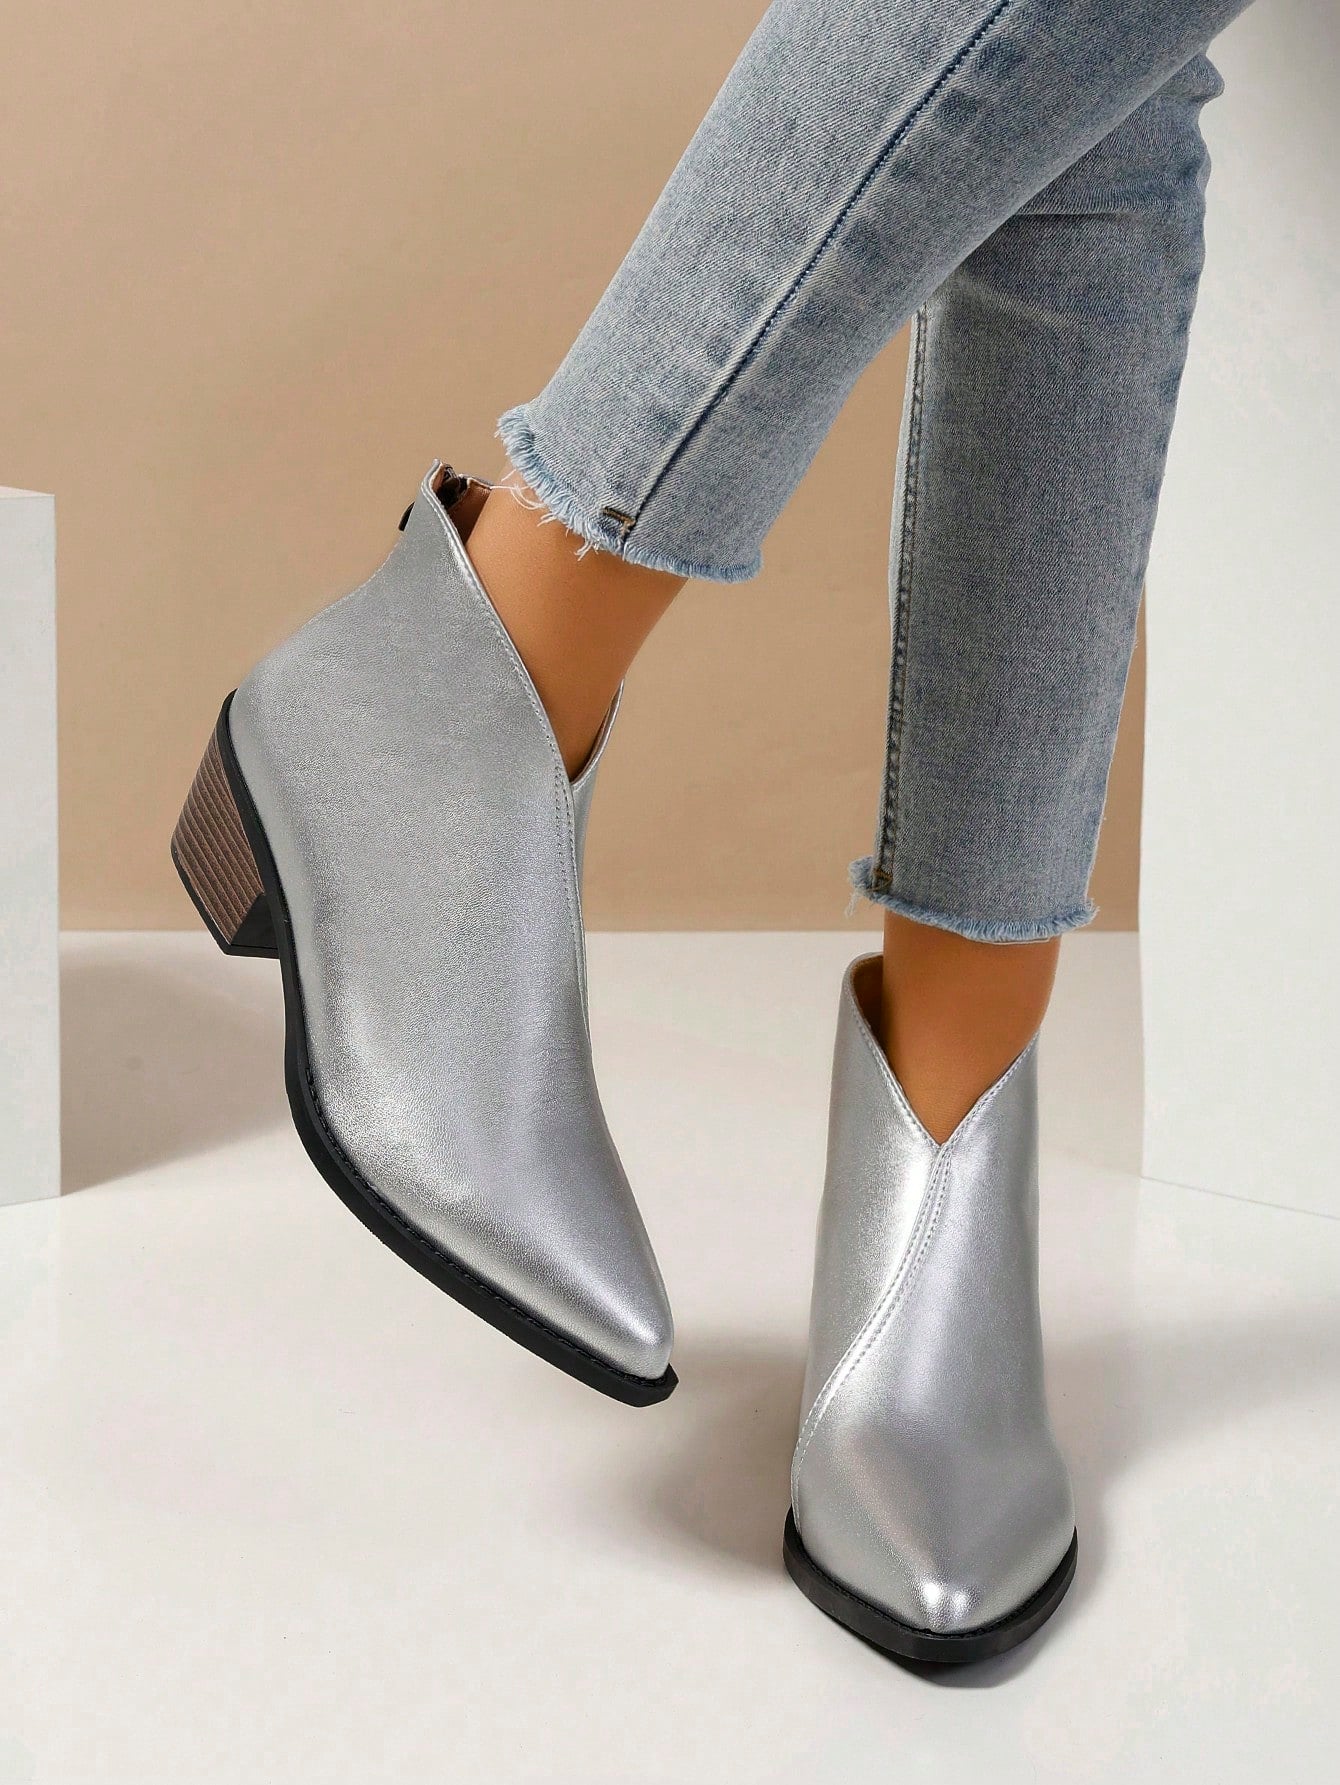 British Style Vintage Silver Boots For Women, Mid-heel, Pointed Toe, Thick Heel, Short Boots And Ankle Boots